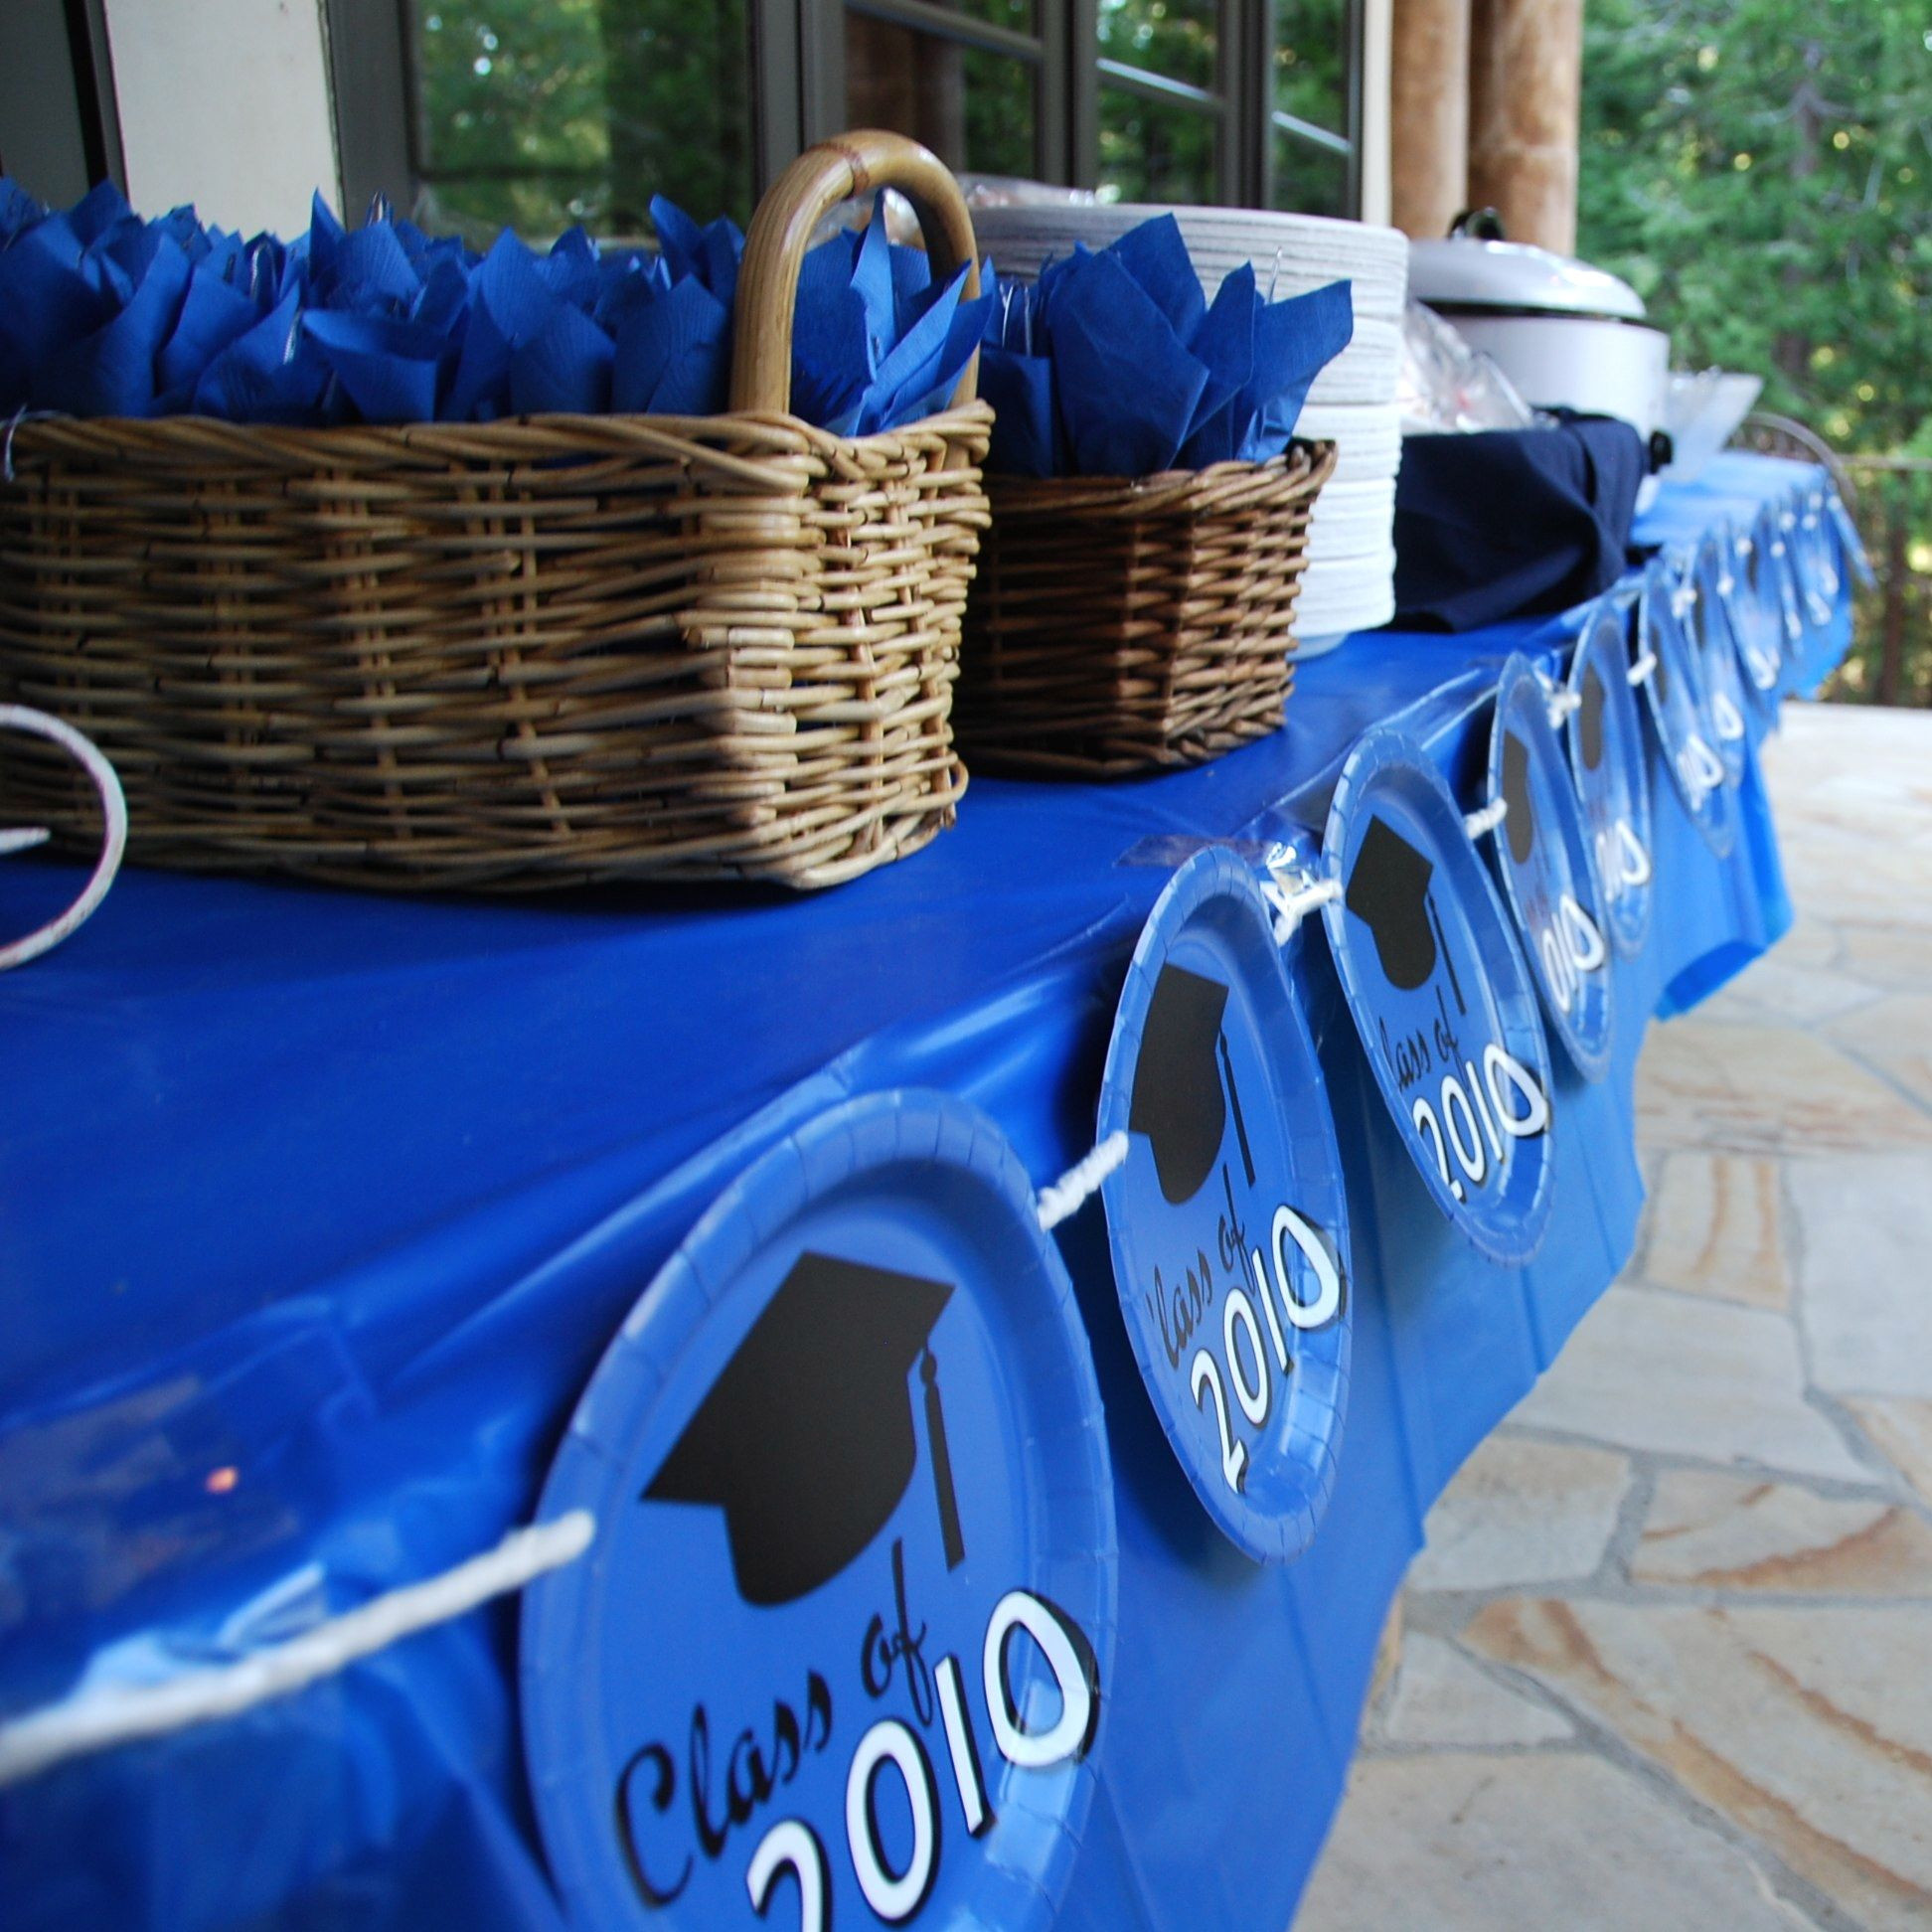 Outdoor Graduation Party Ideas For Guys
 HOW TO THROW A GREAT GRADUATION PARTY